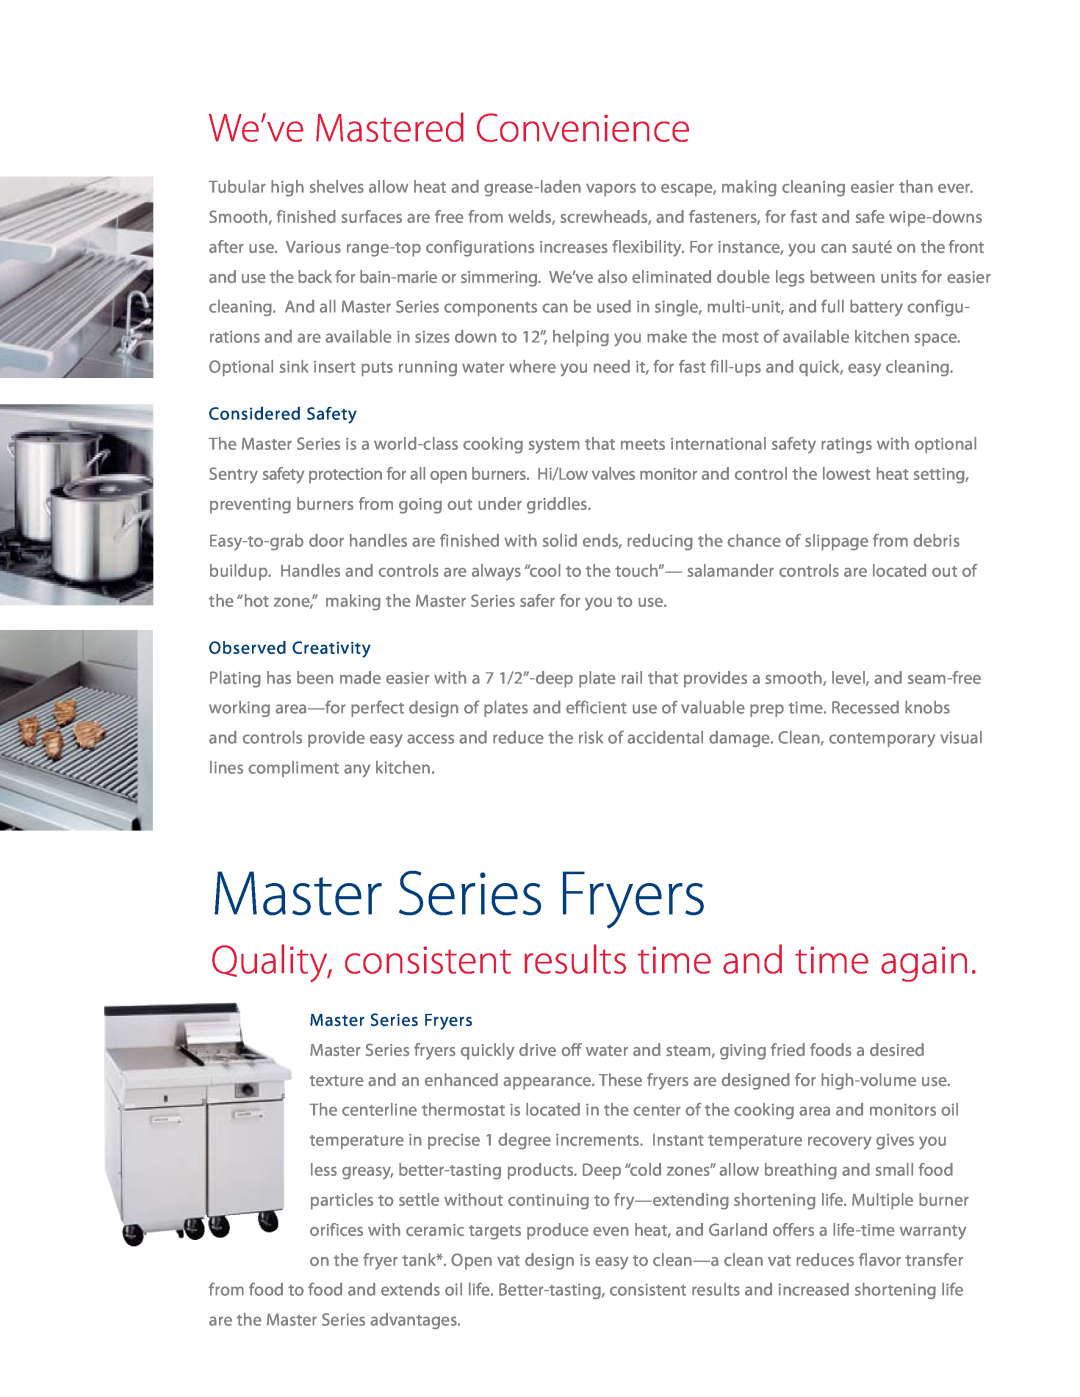 Garland manual Master Series Fryers, We’ve Mastered Convenience, Quality, consistent results time and time again 